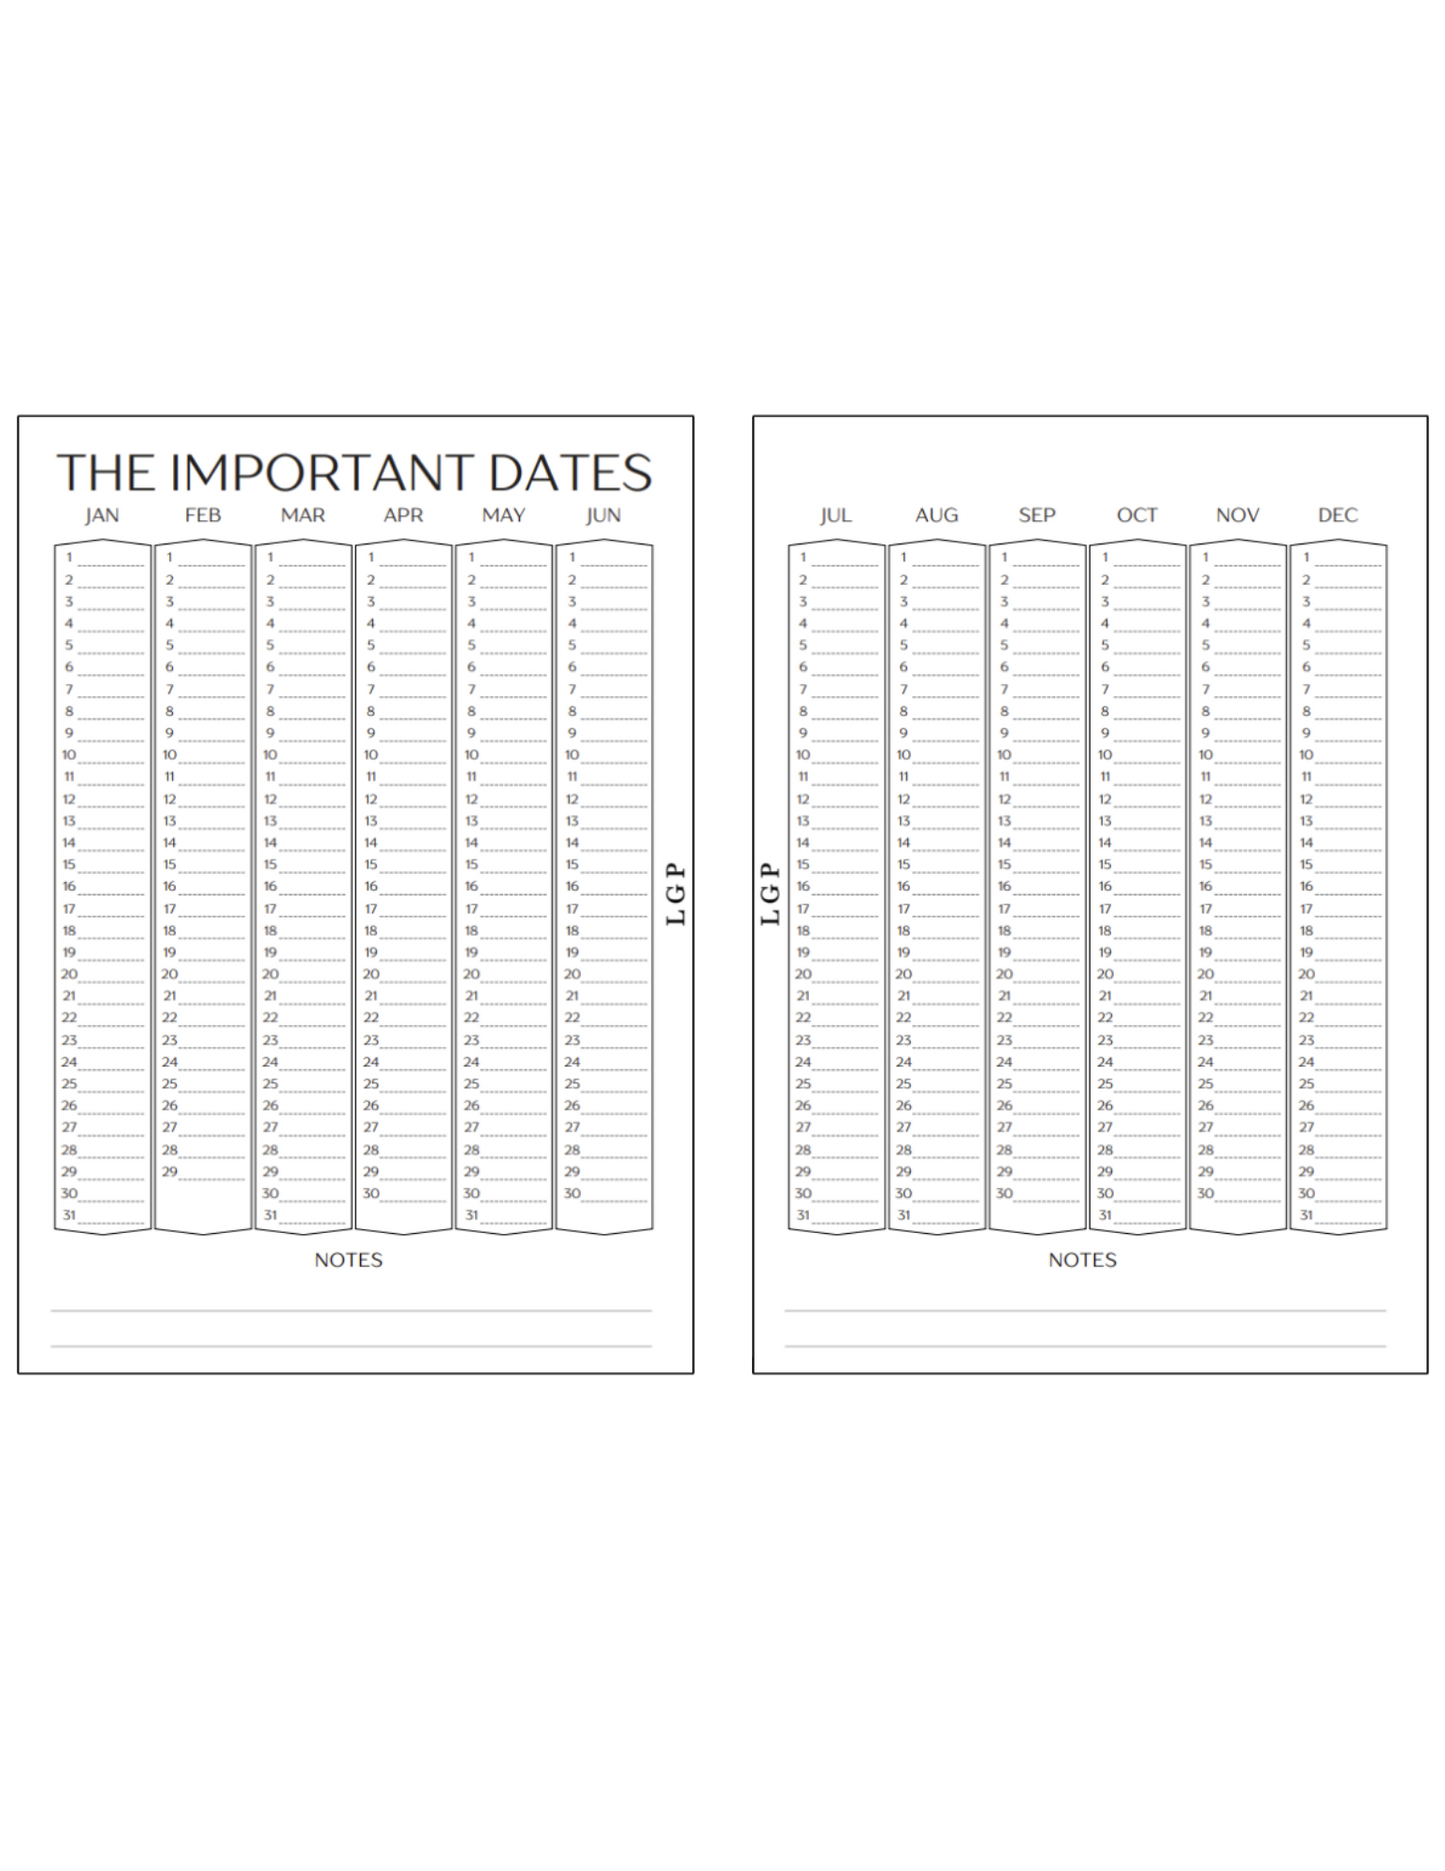 DIGITAL 2024 Planner Companion Inserts (NO PHYSICAL PRODUCT)